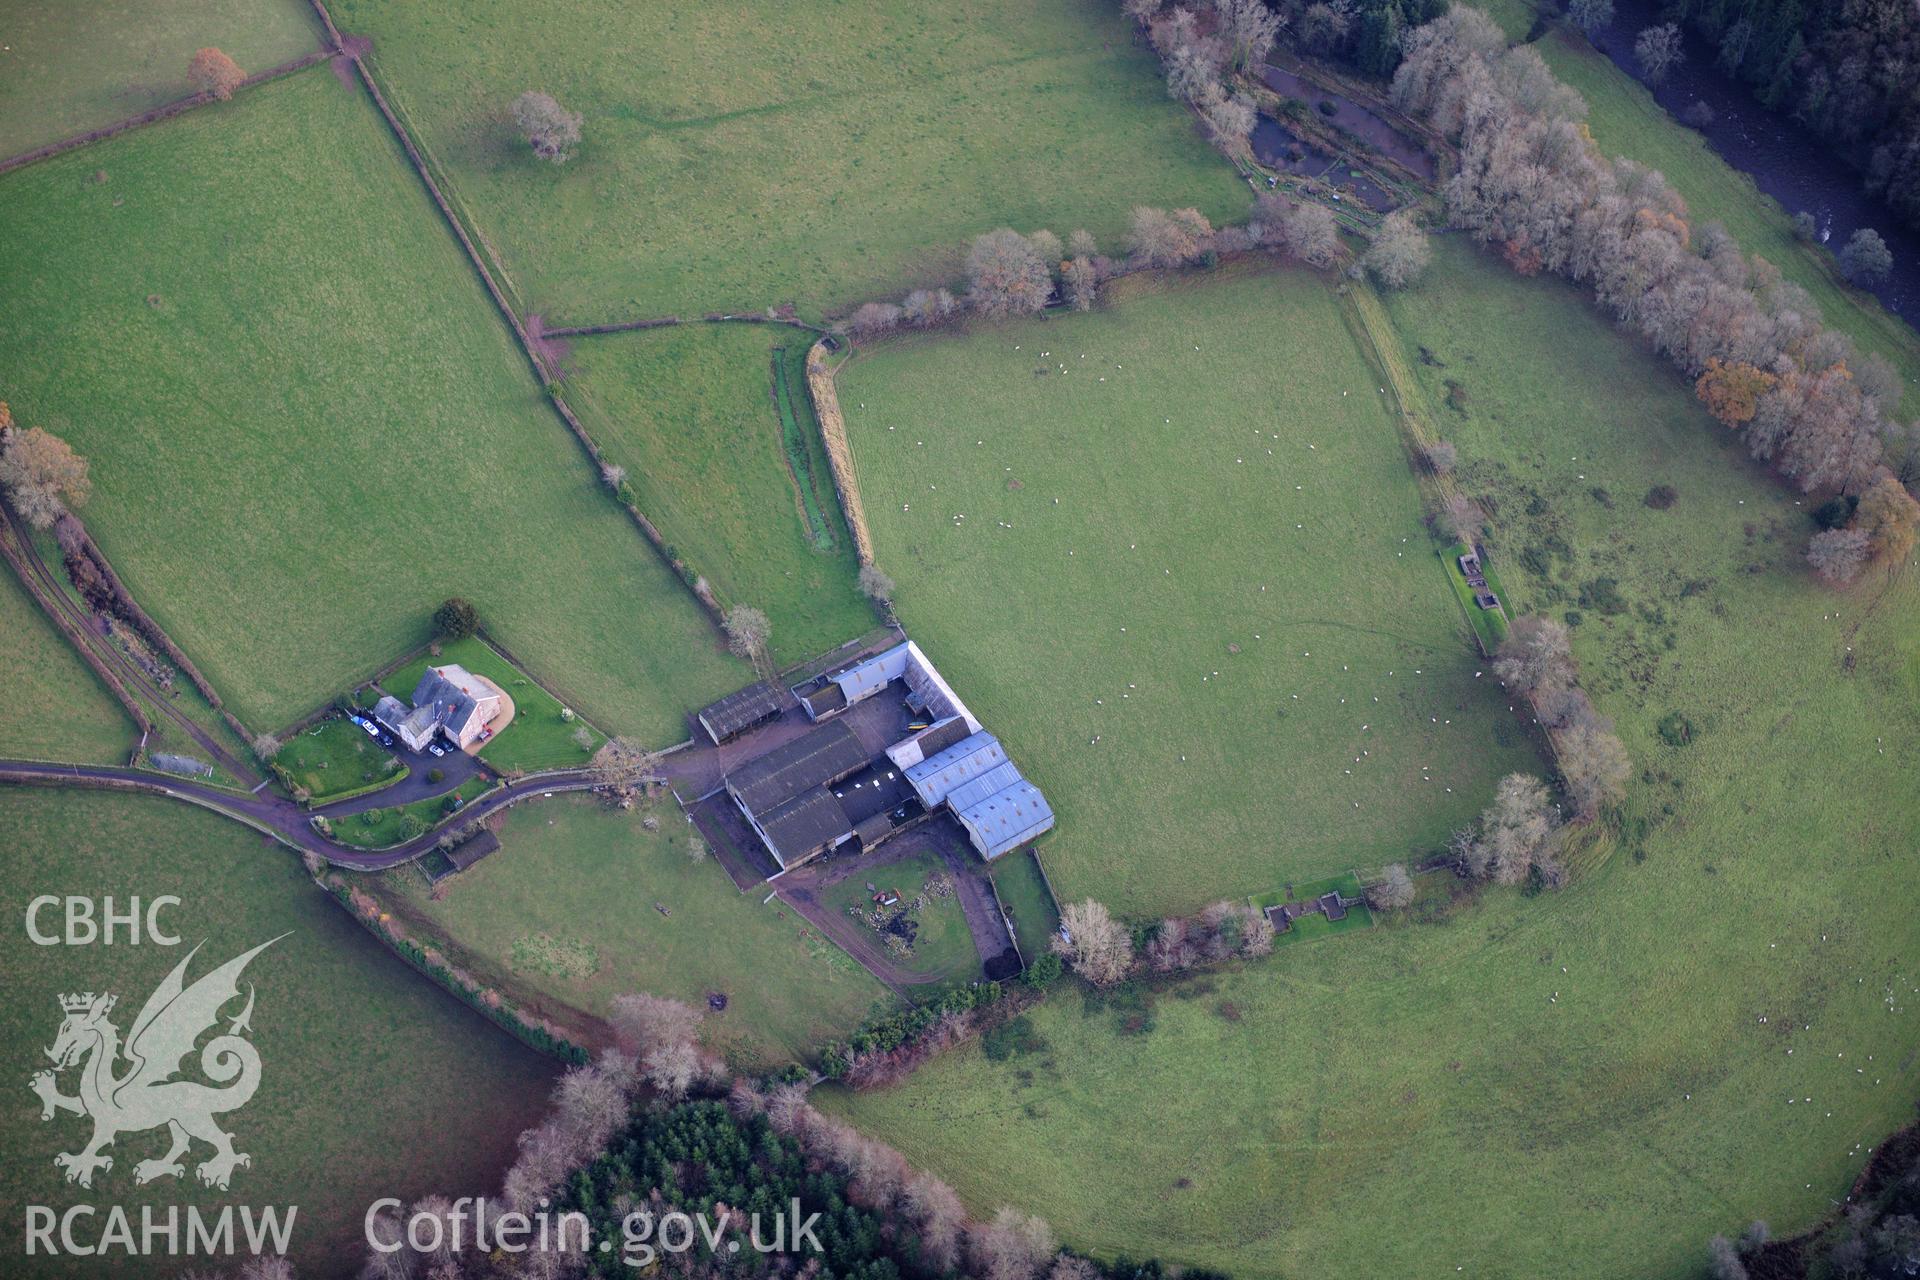 RCAHMW colour oblique photograph of Brecon Gaer Roman fort. Taken by Toby Driver on 23/11/2012.